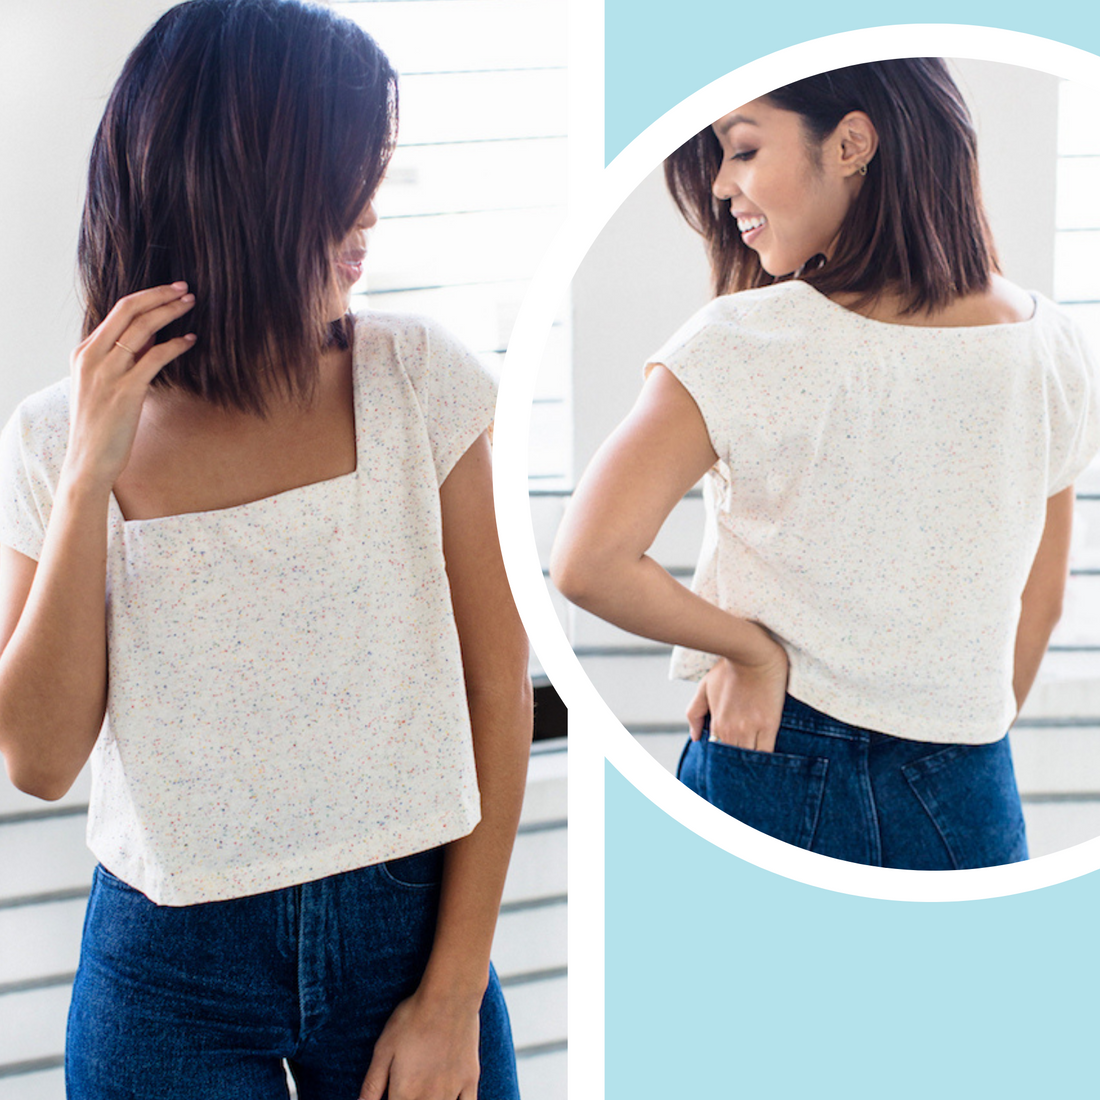 The Square Neck Top - Paper Sewing Pattern